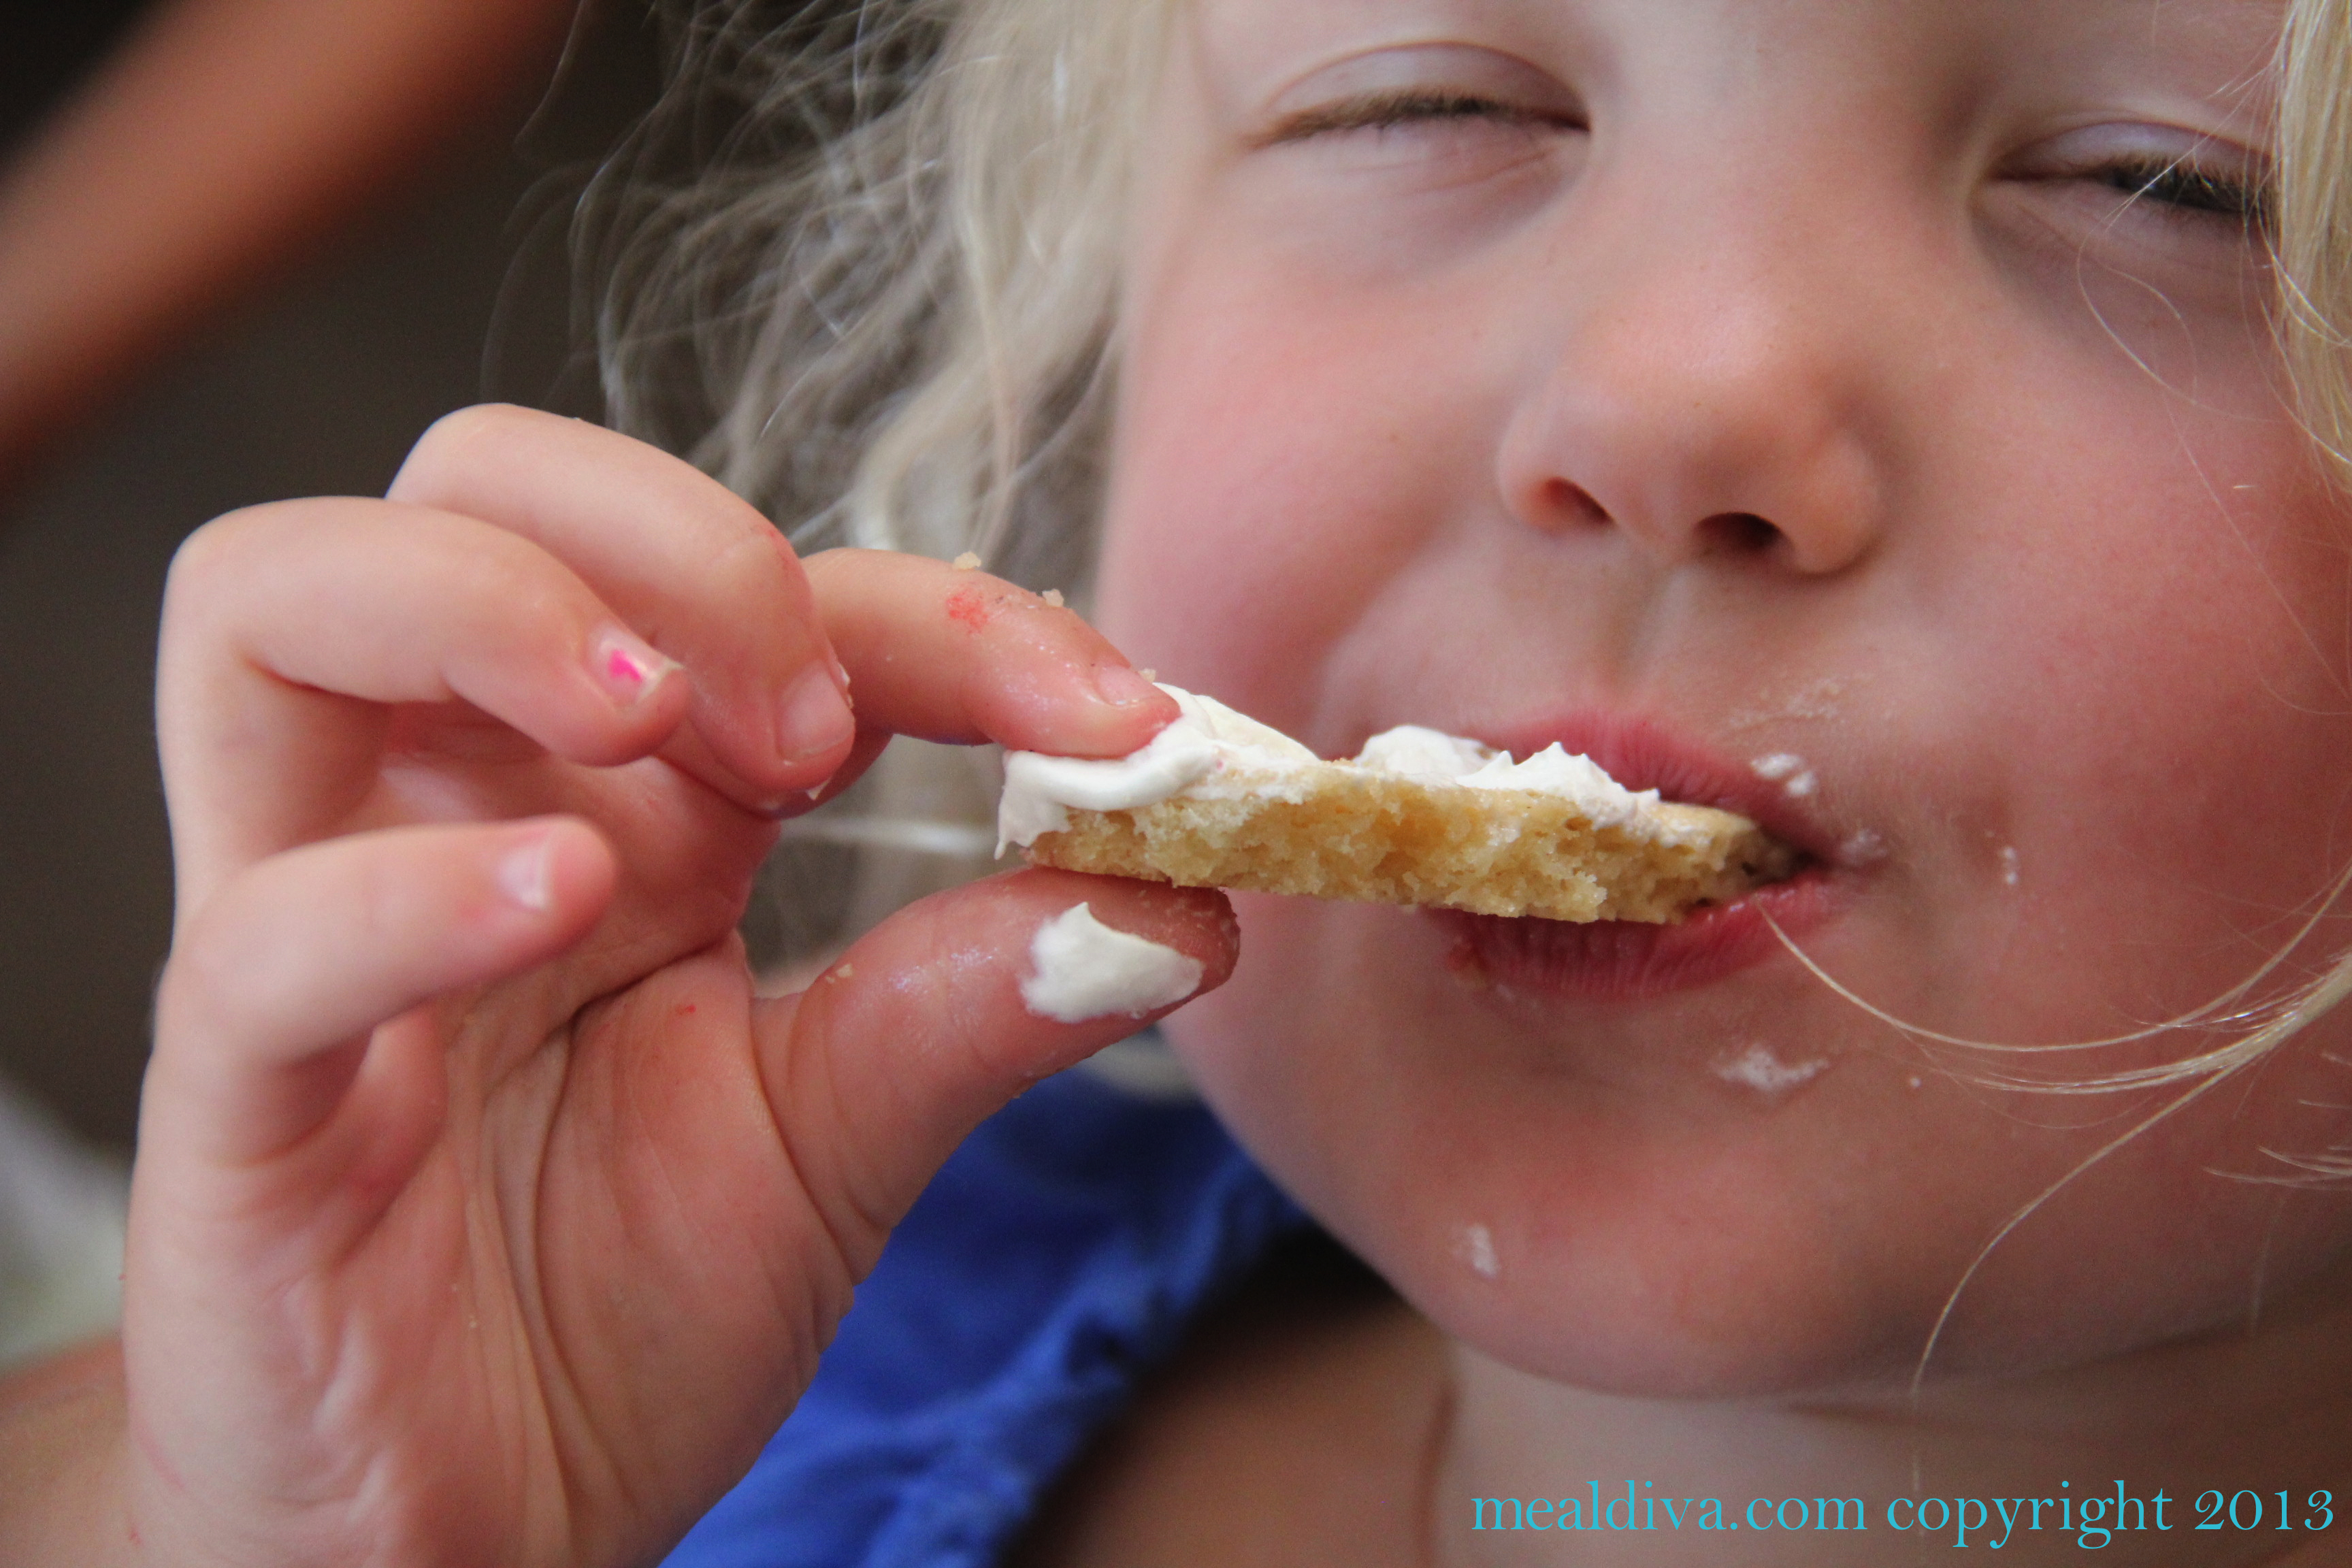 10 Ideas To Get Your Kids To Eat More Of The “Good Stuff”